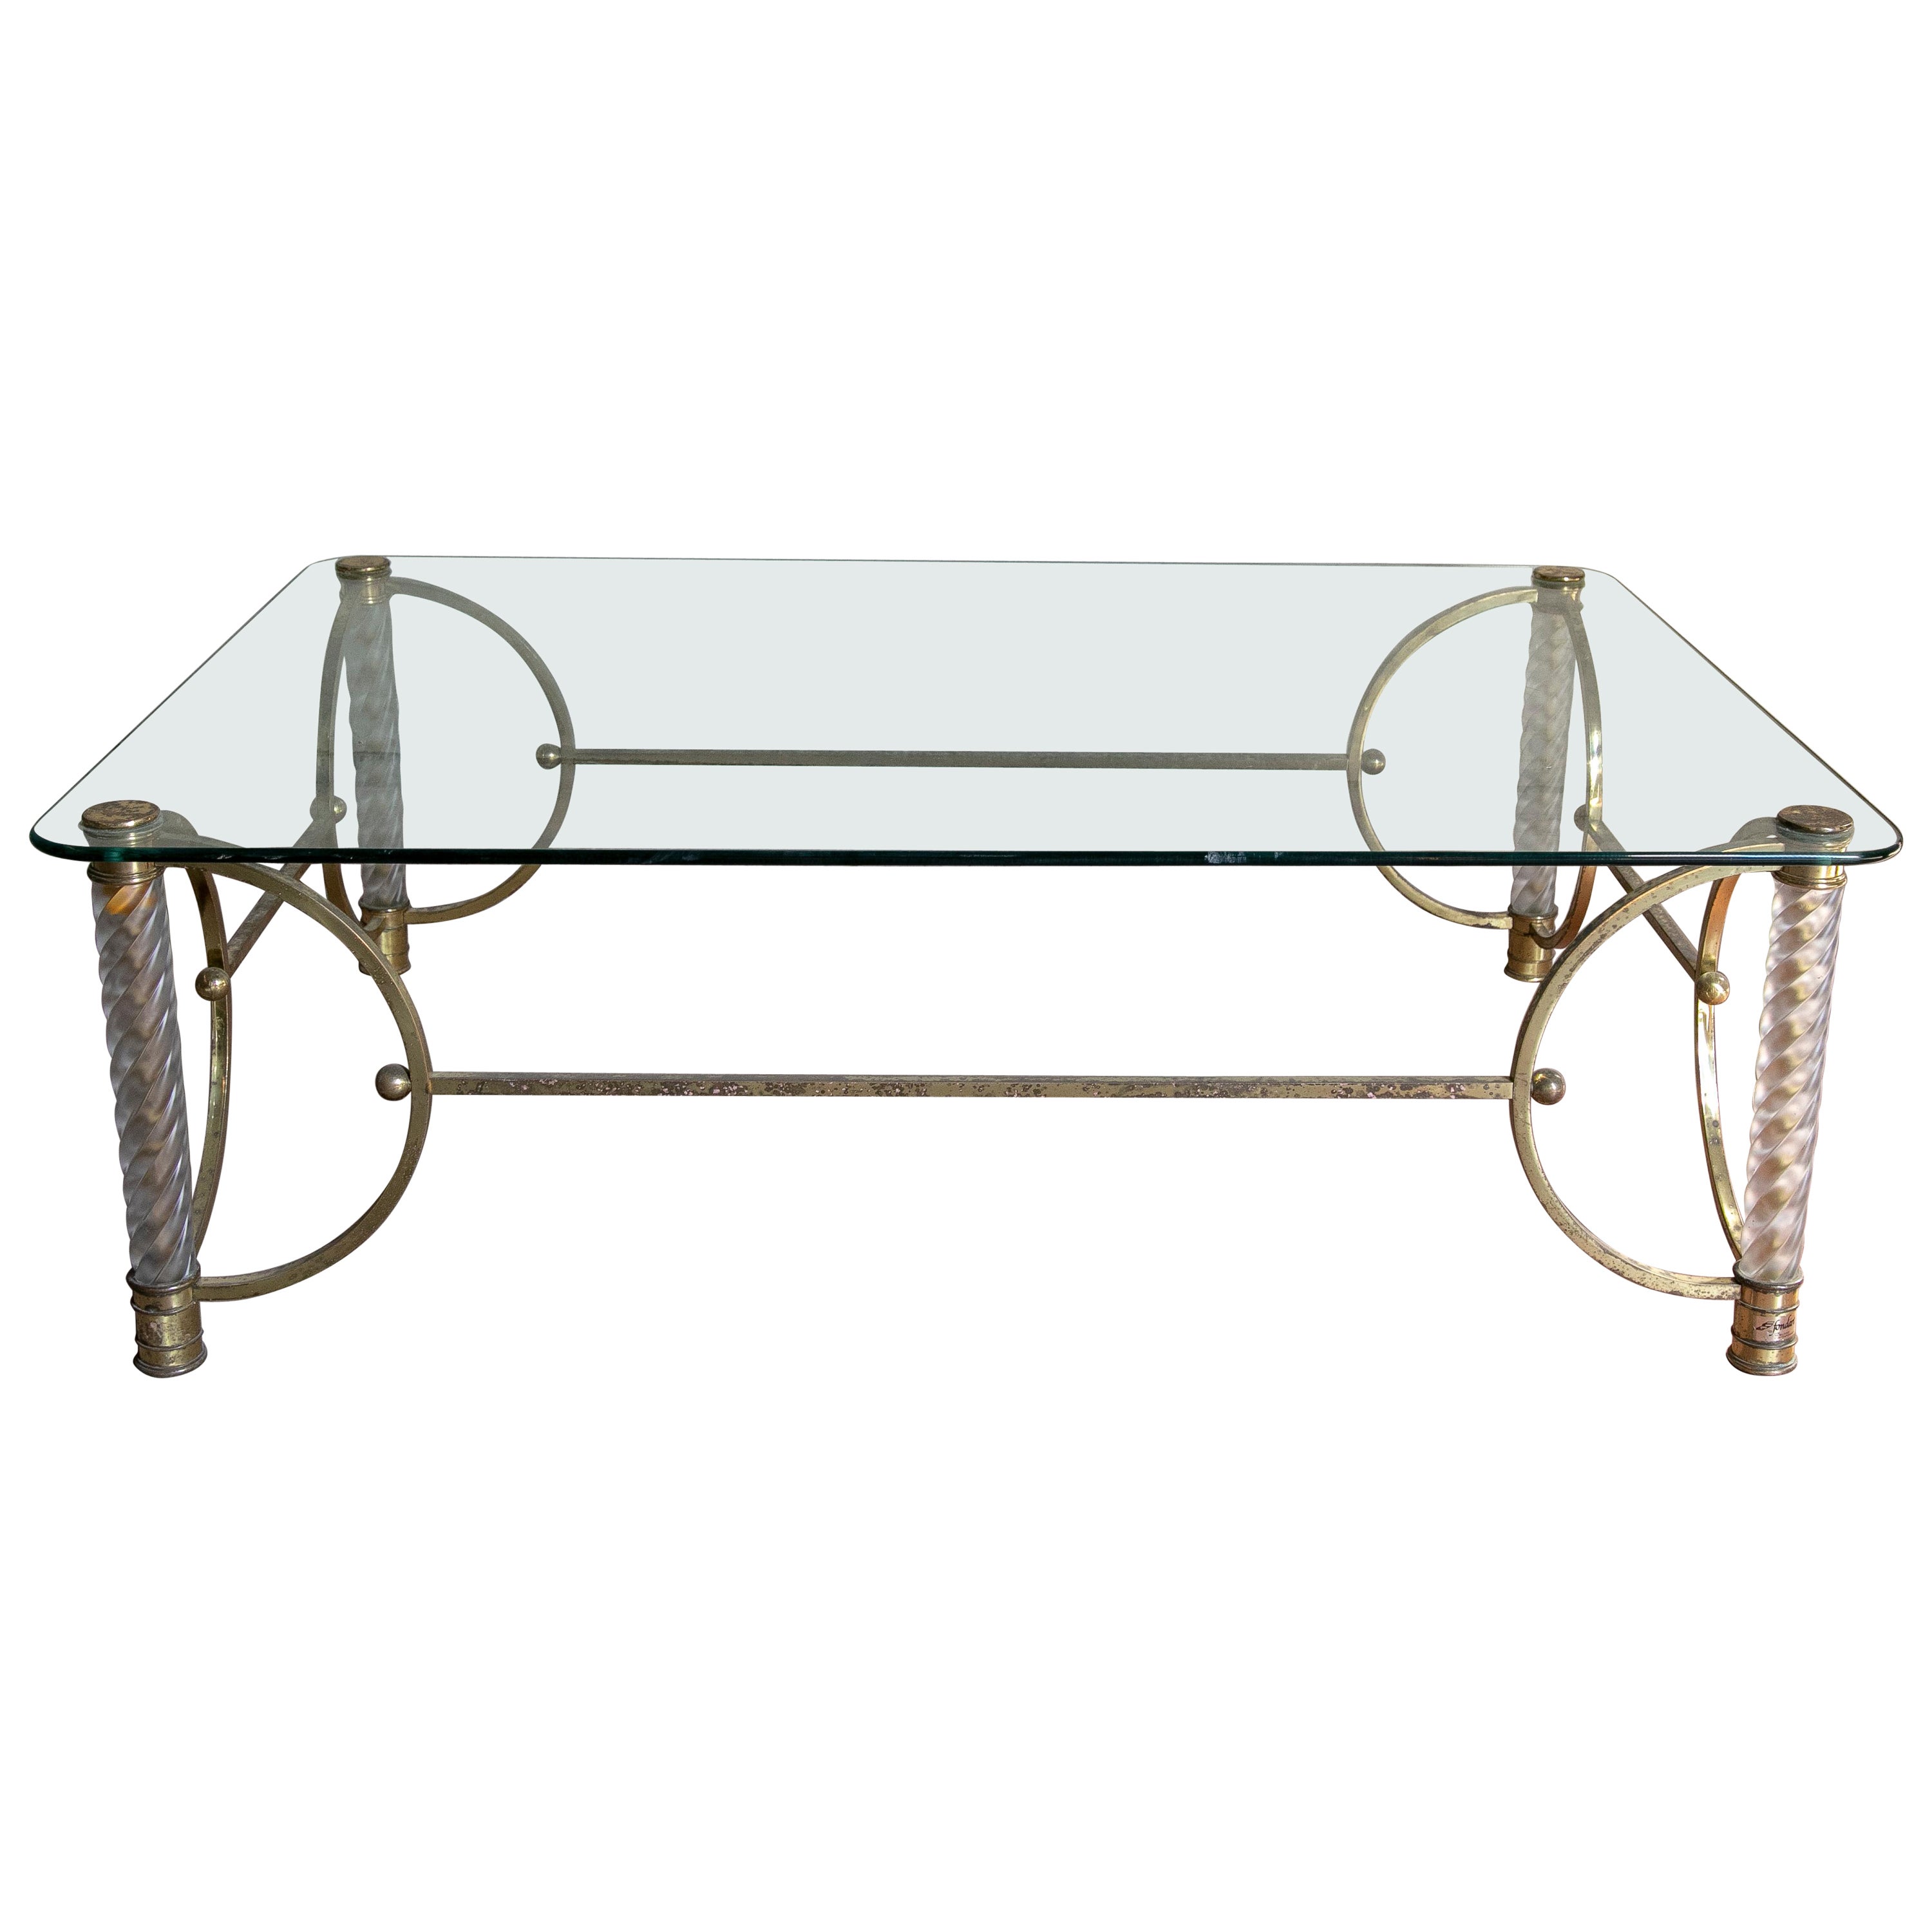 1970s Gilded Metal Table with Legs and Glass Table Top